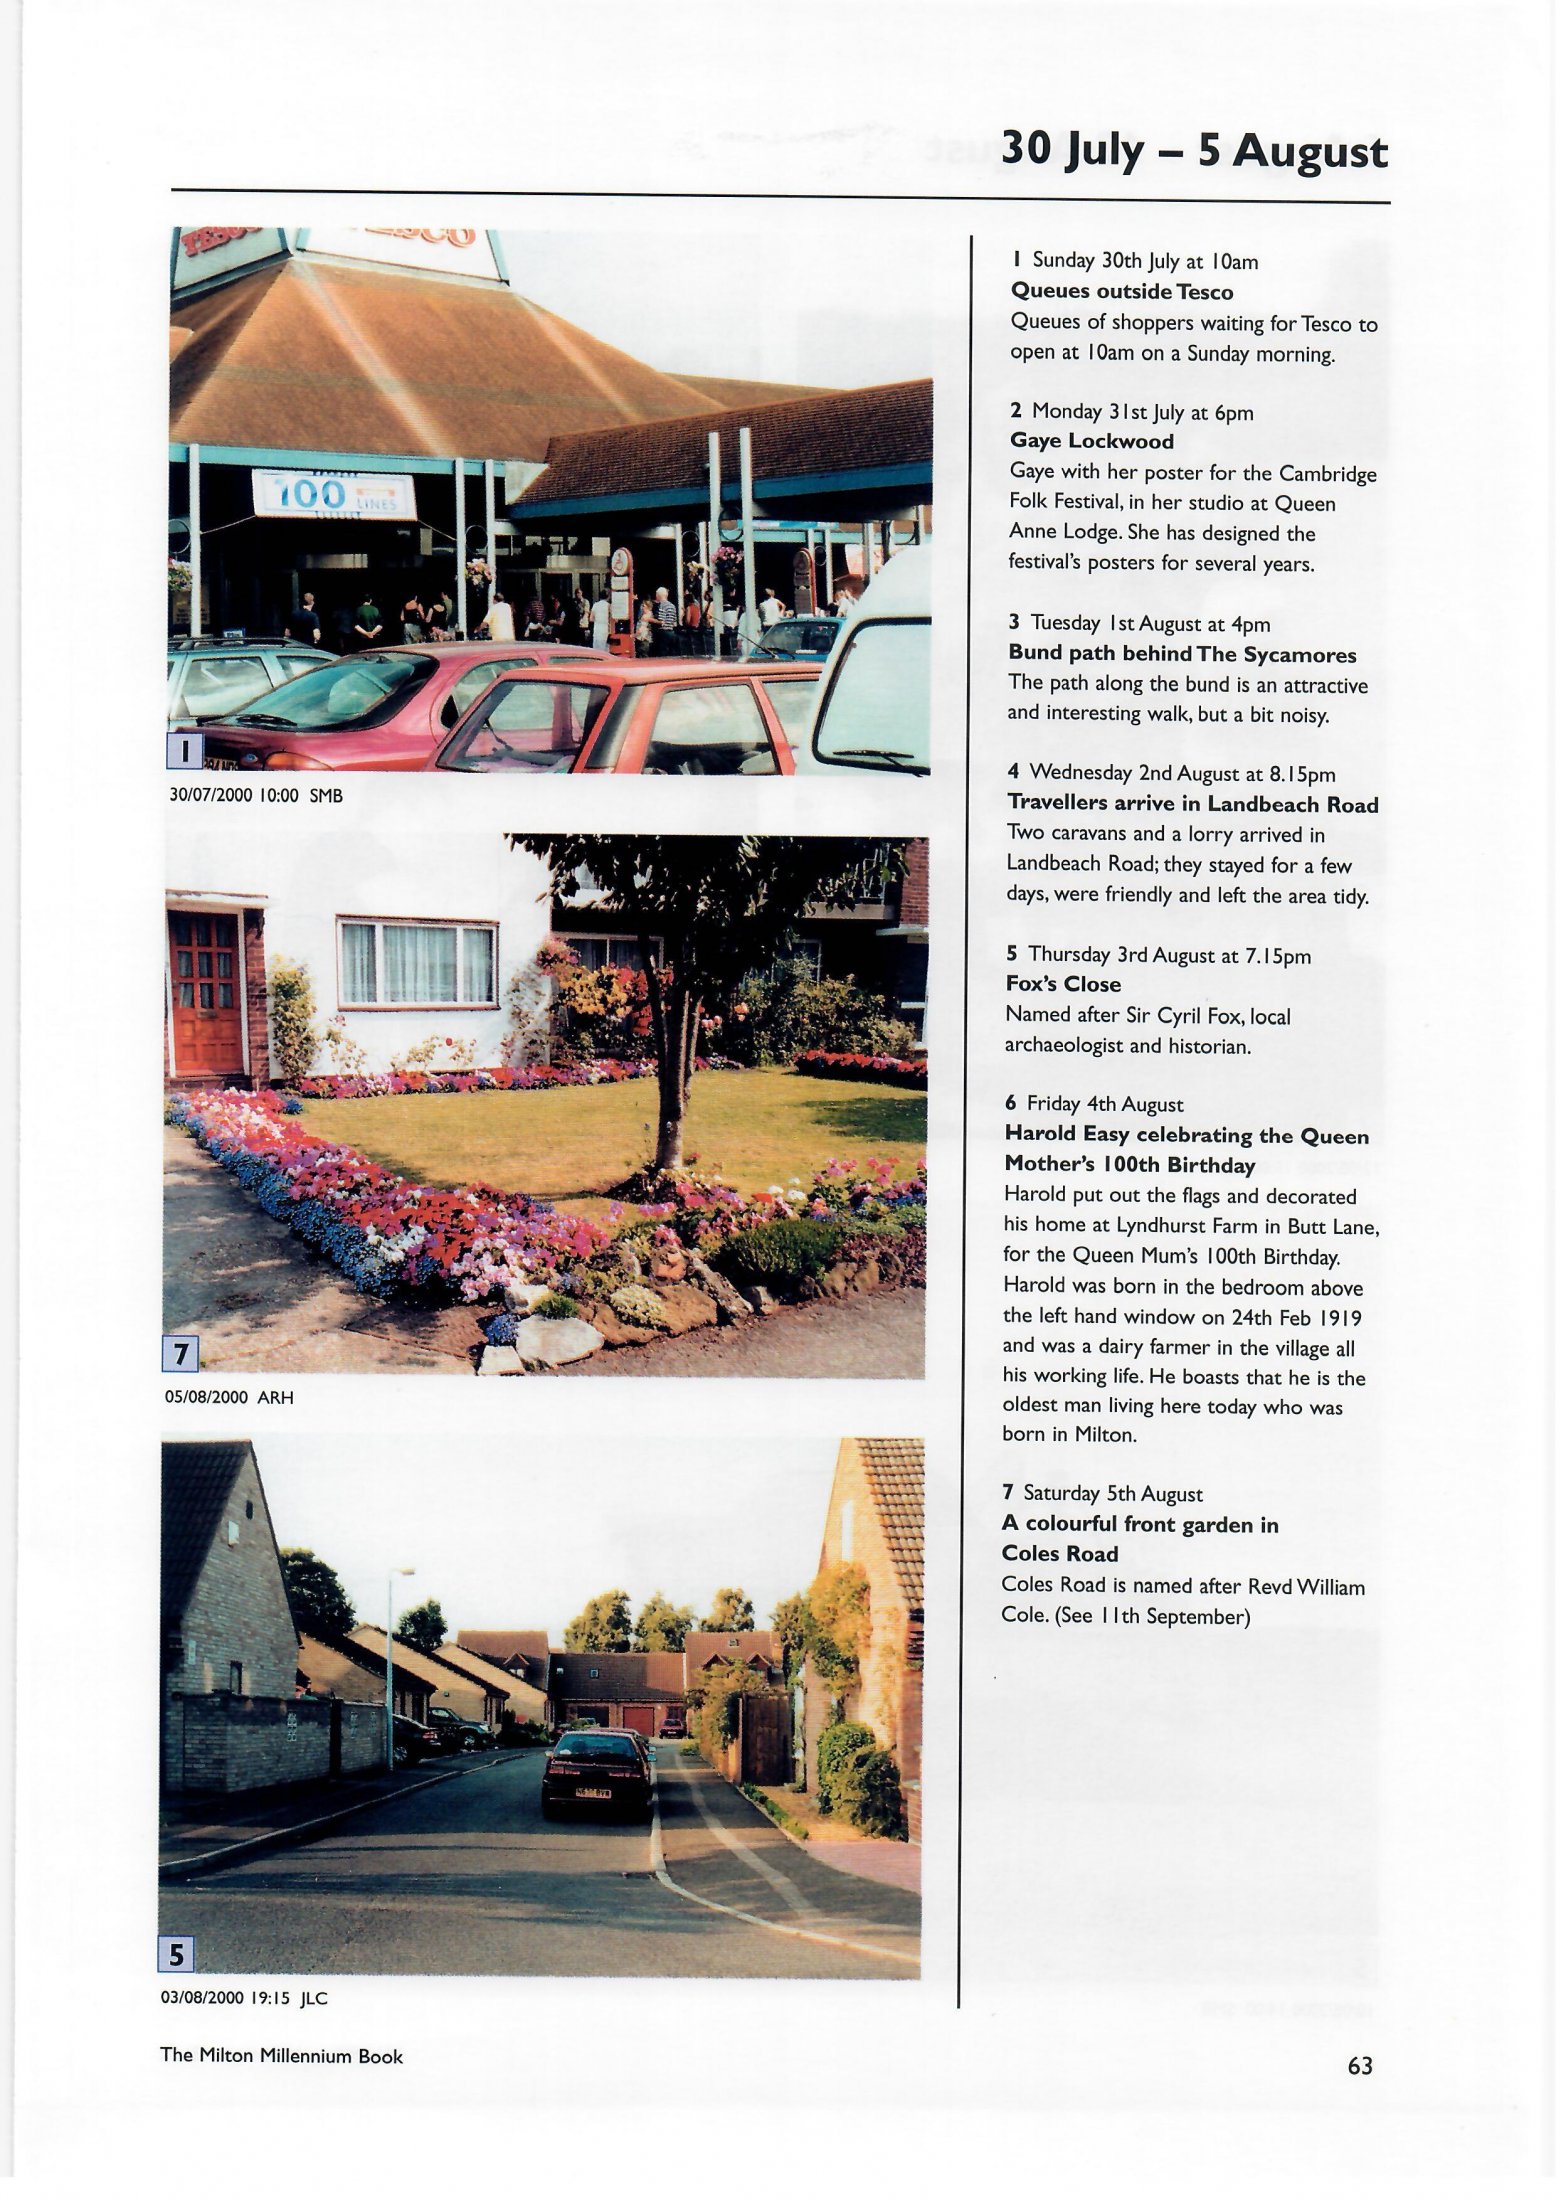 Milton 2000 July - Aug Pages - 54 -63 B -0010